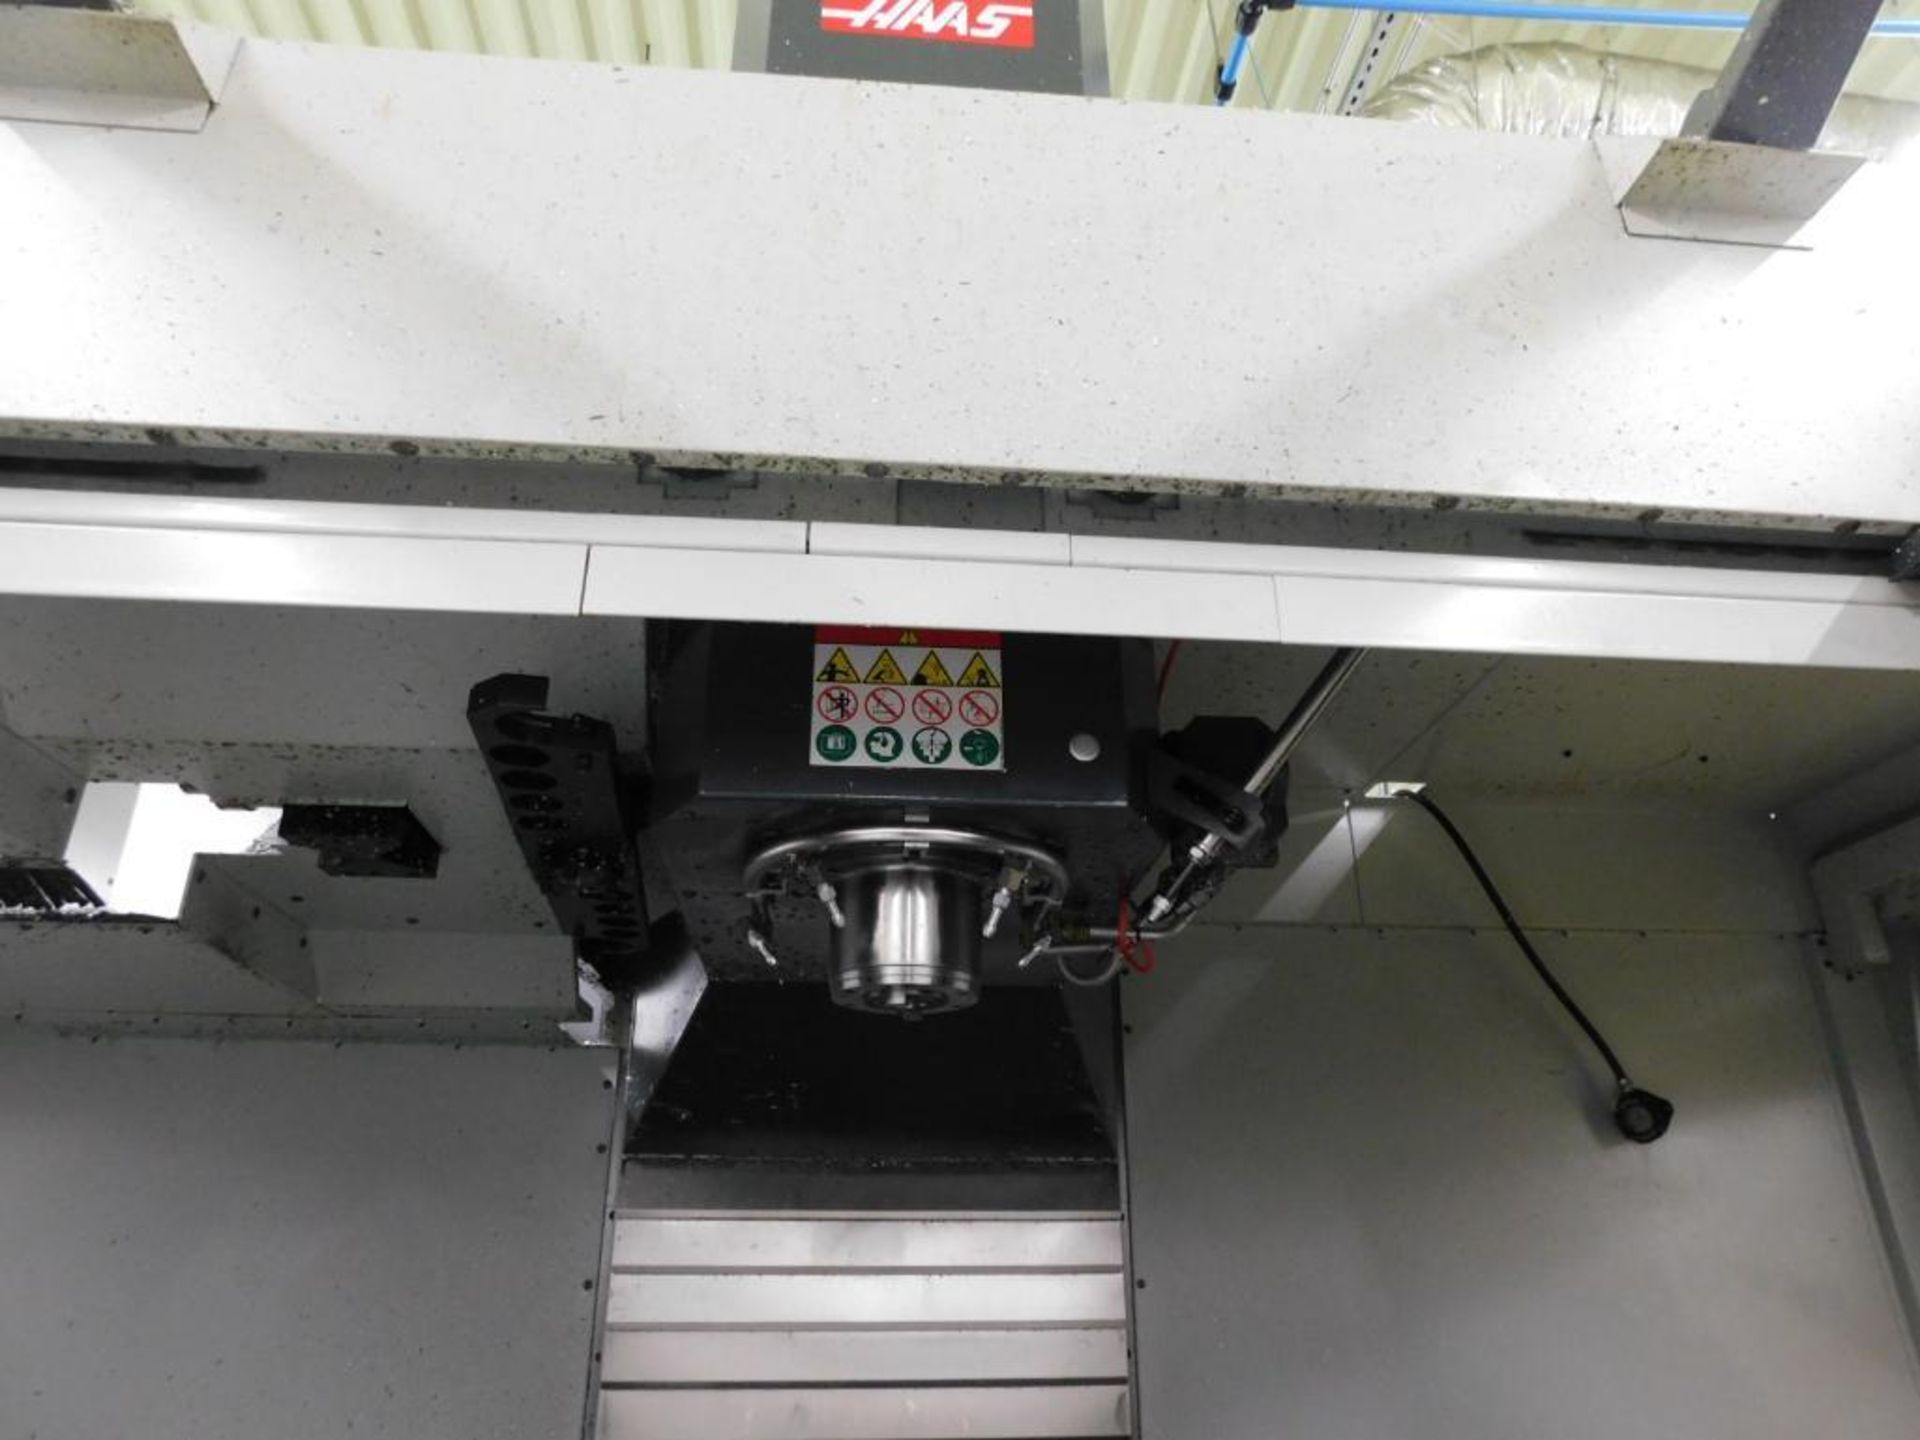 Haas VF-8/40 CNC Vertical Machining Center, Haas CNC Control w/Remote Pendant, Travels: X-64", Y-40" - Image 11 of 13